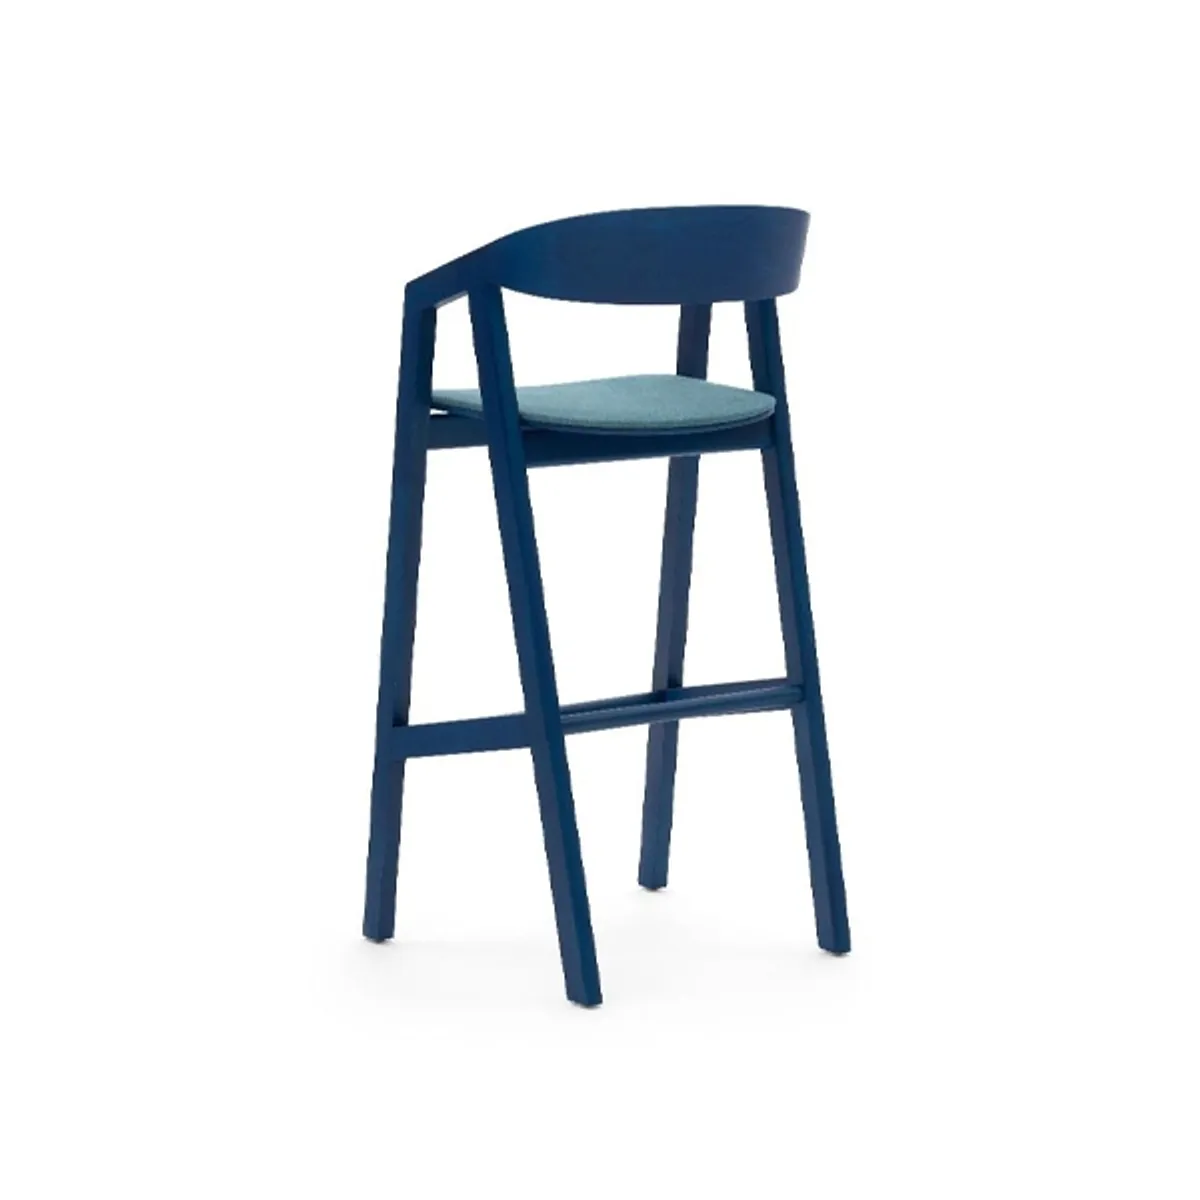 Sadie bar stool Inside Out Contracts3